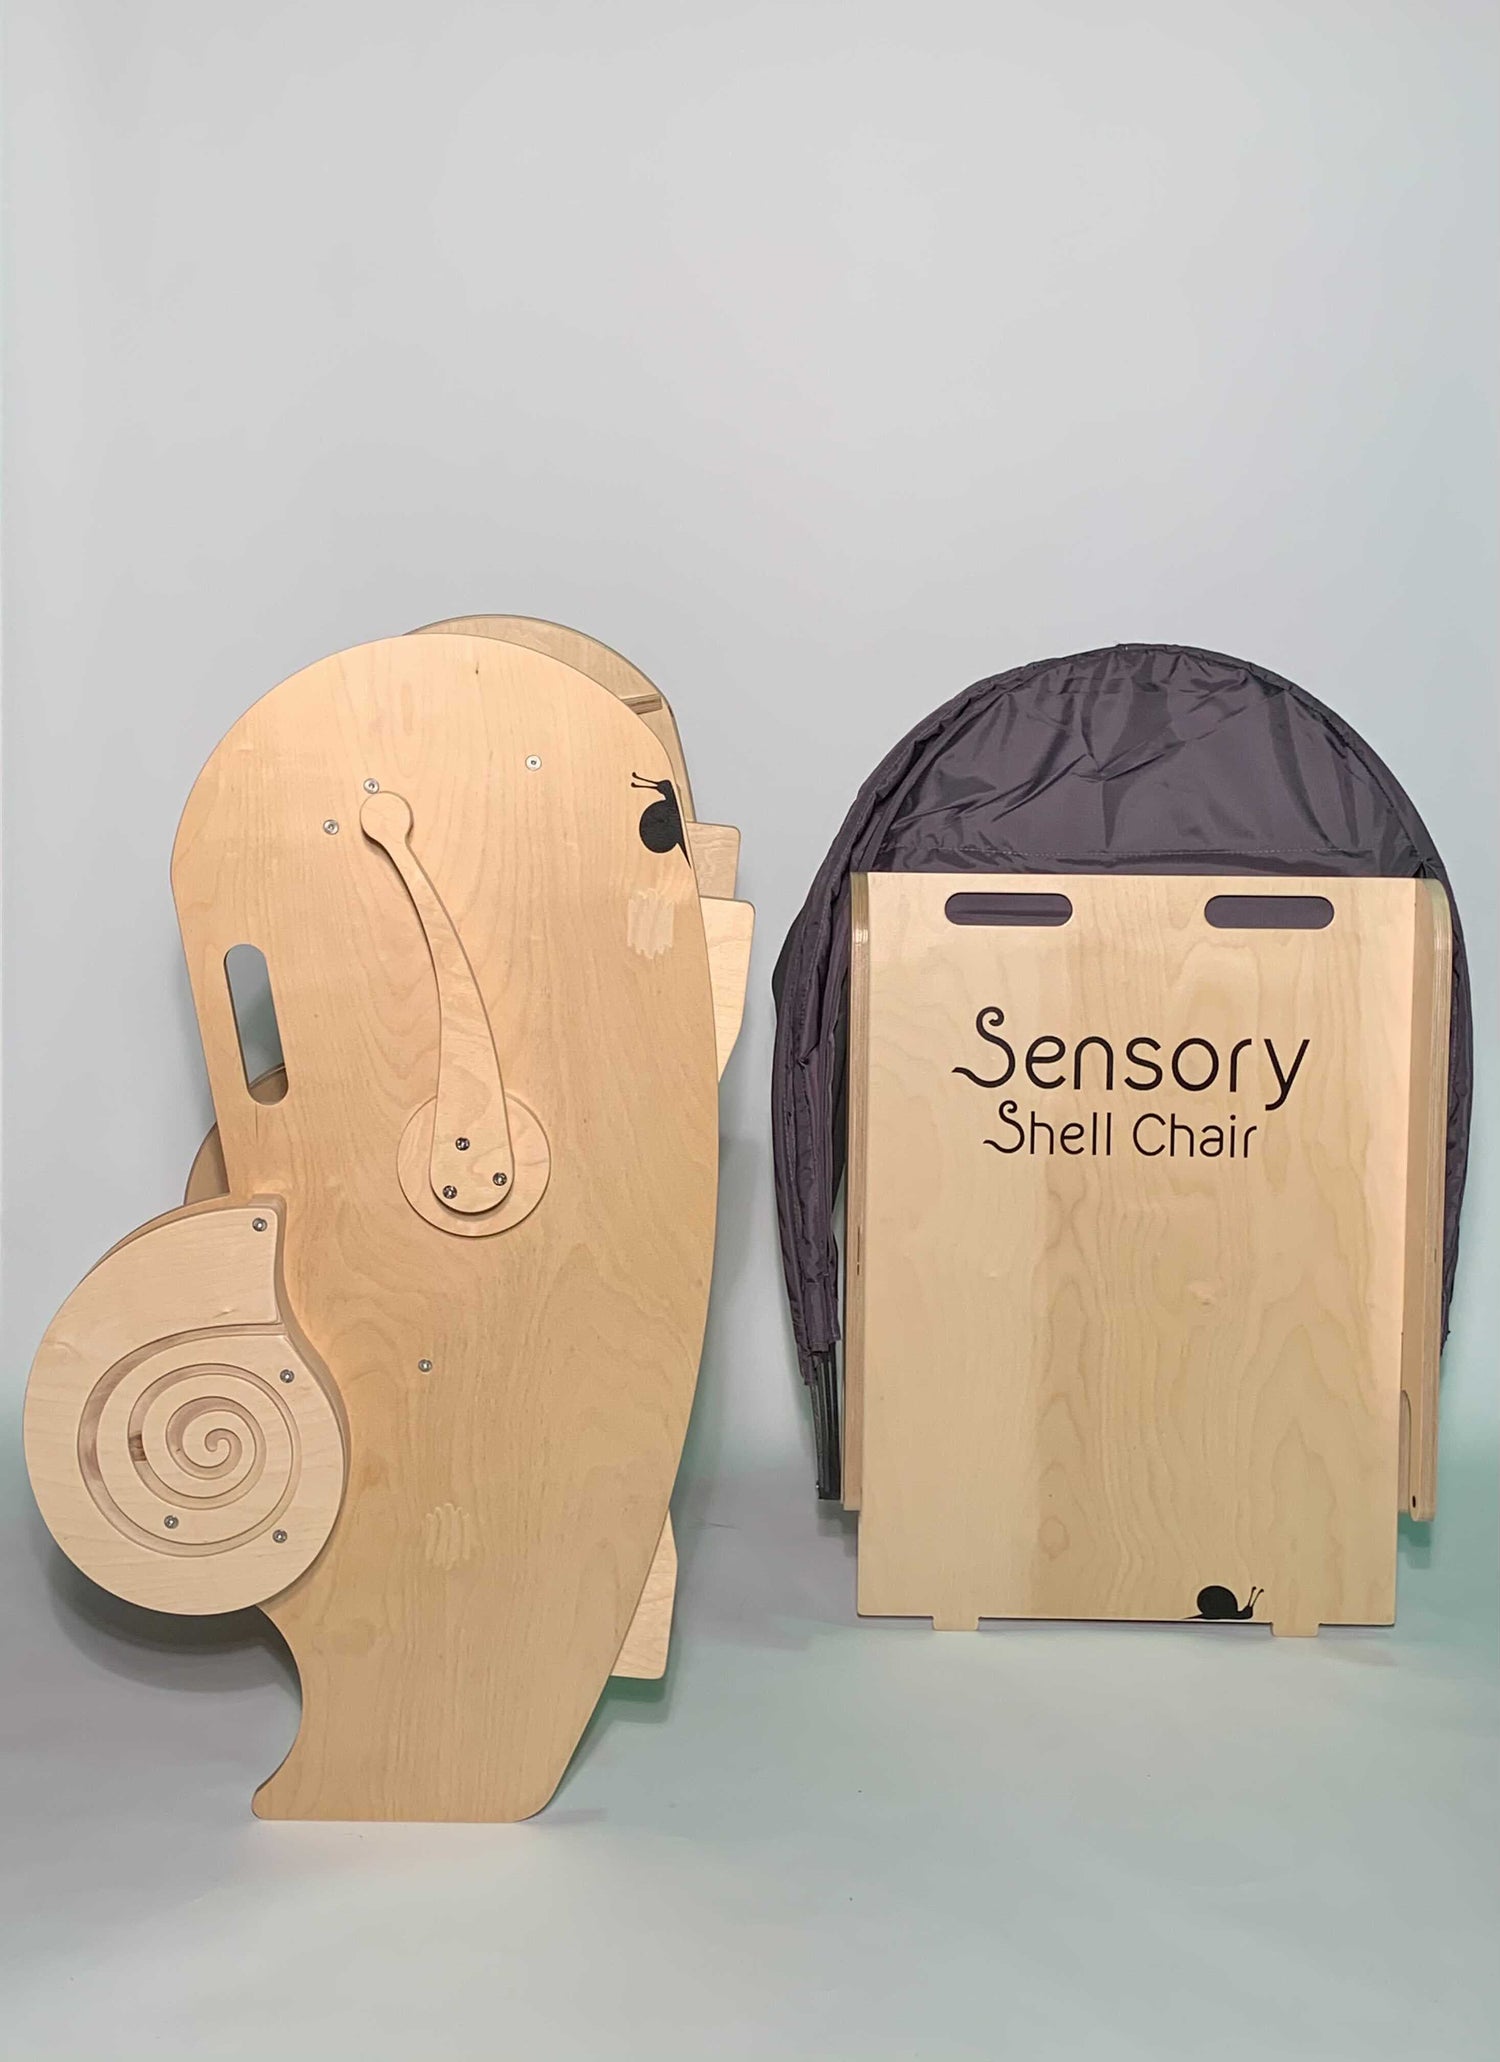 View of the sensory shell chair seperated into two sections 